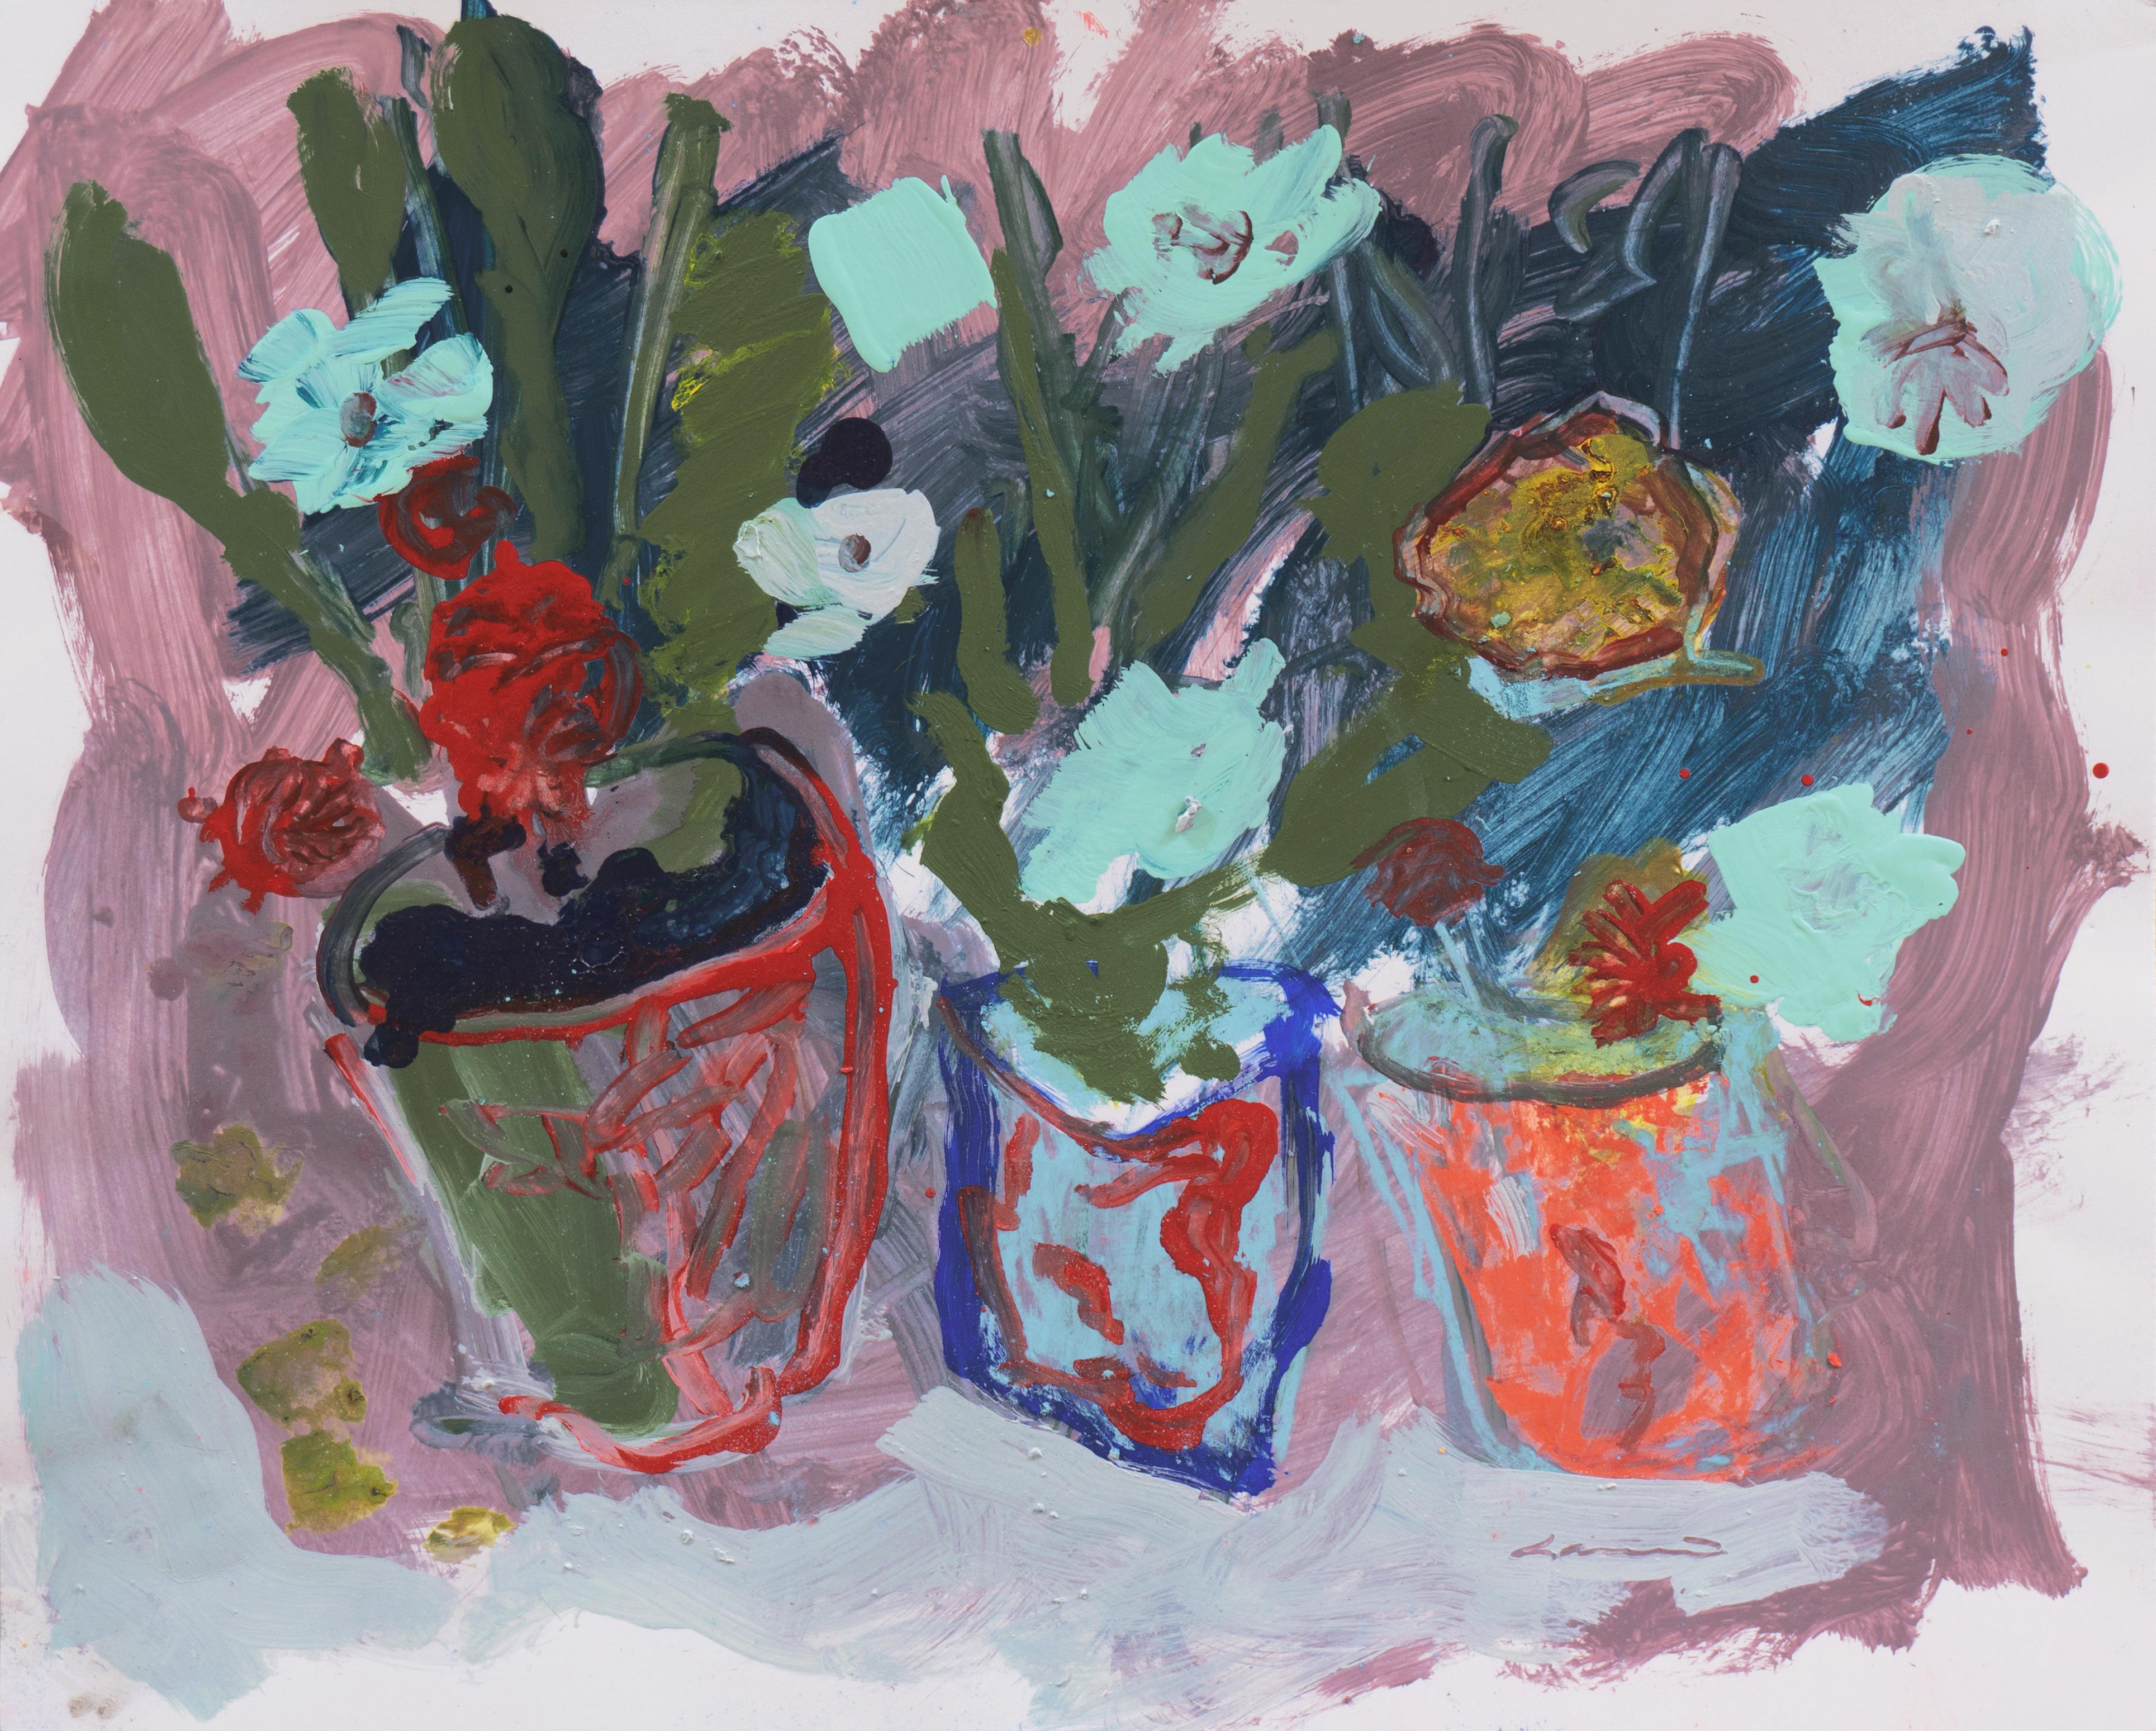 Robert Canete Landscape Painting - 'Three Flower Pots', California Expressionist Oil, Stanford, Carmel